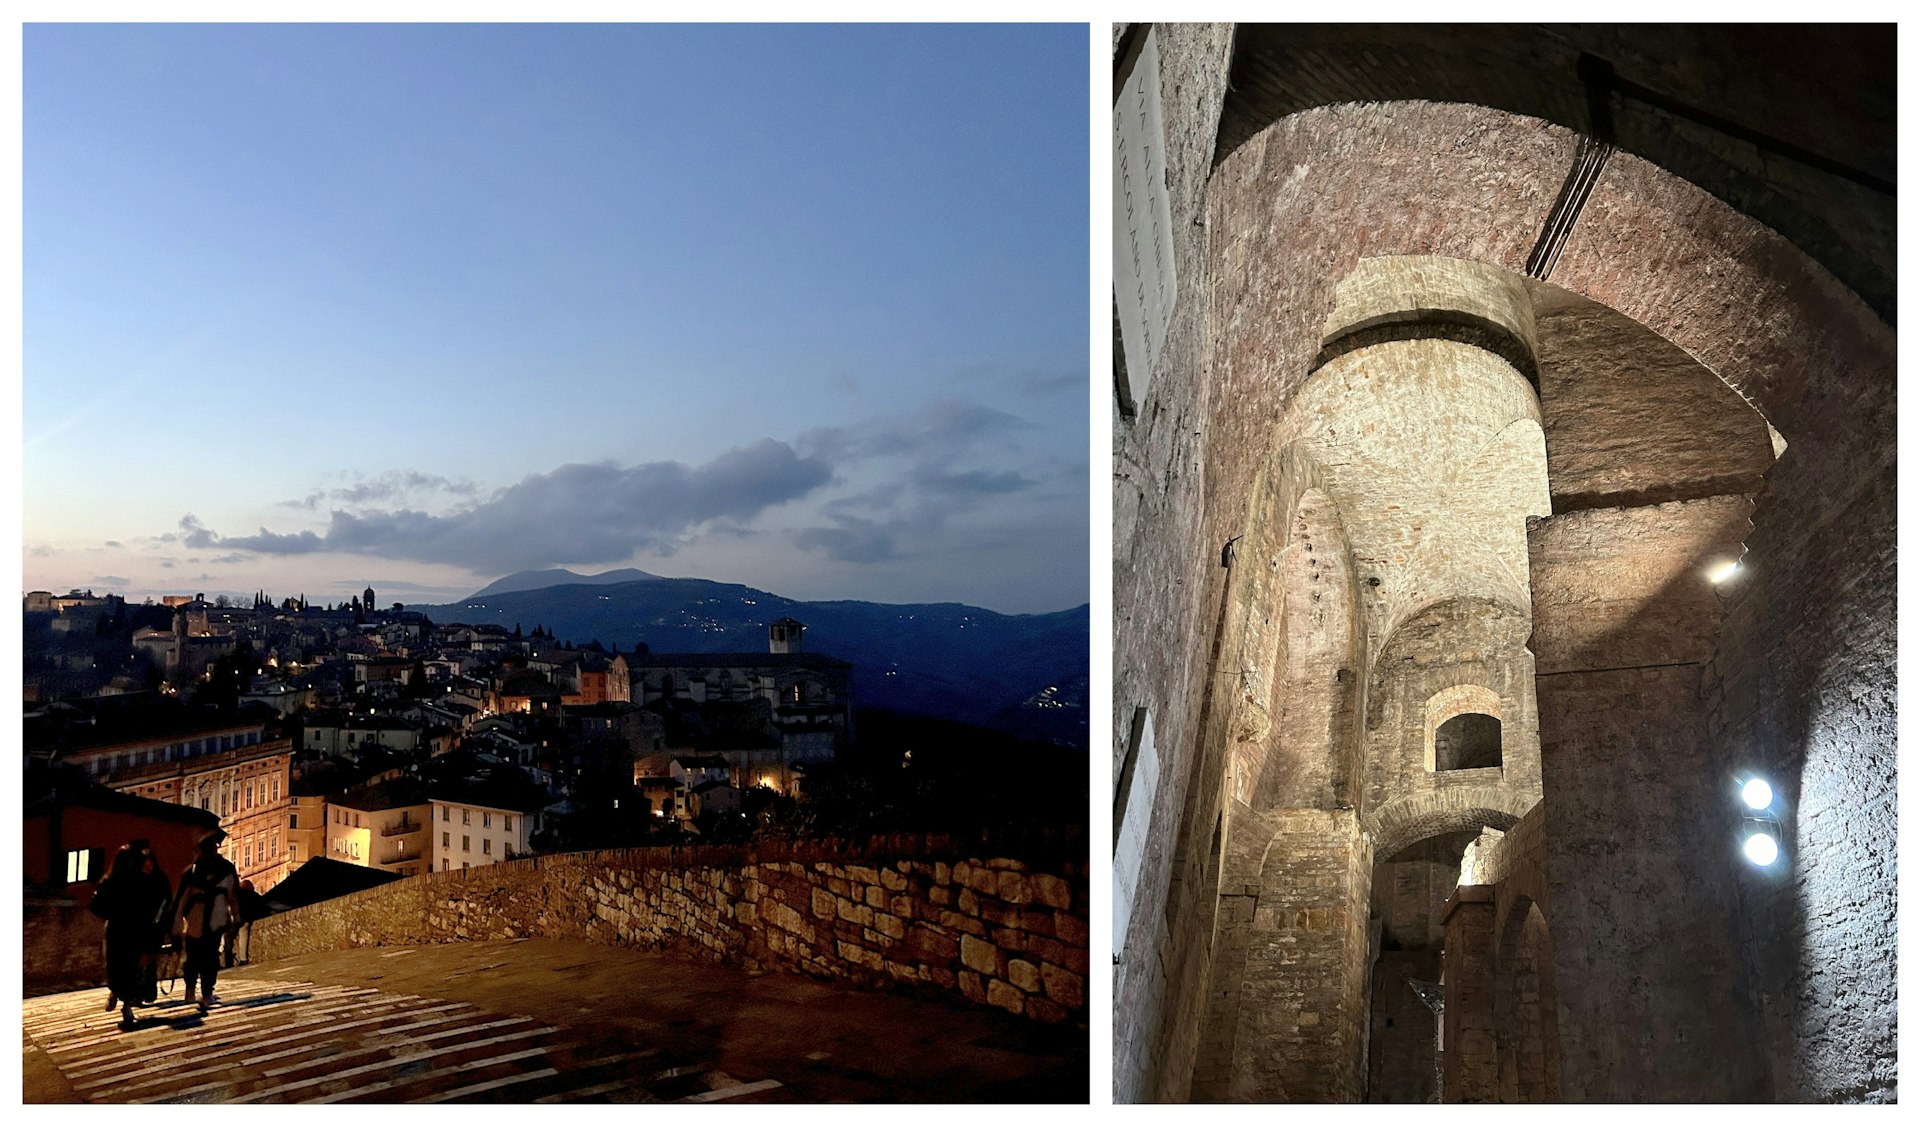 Left: the last few minutes of light over the town of Perugia; Right: looking up in an underground fortress